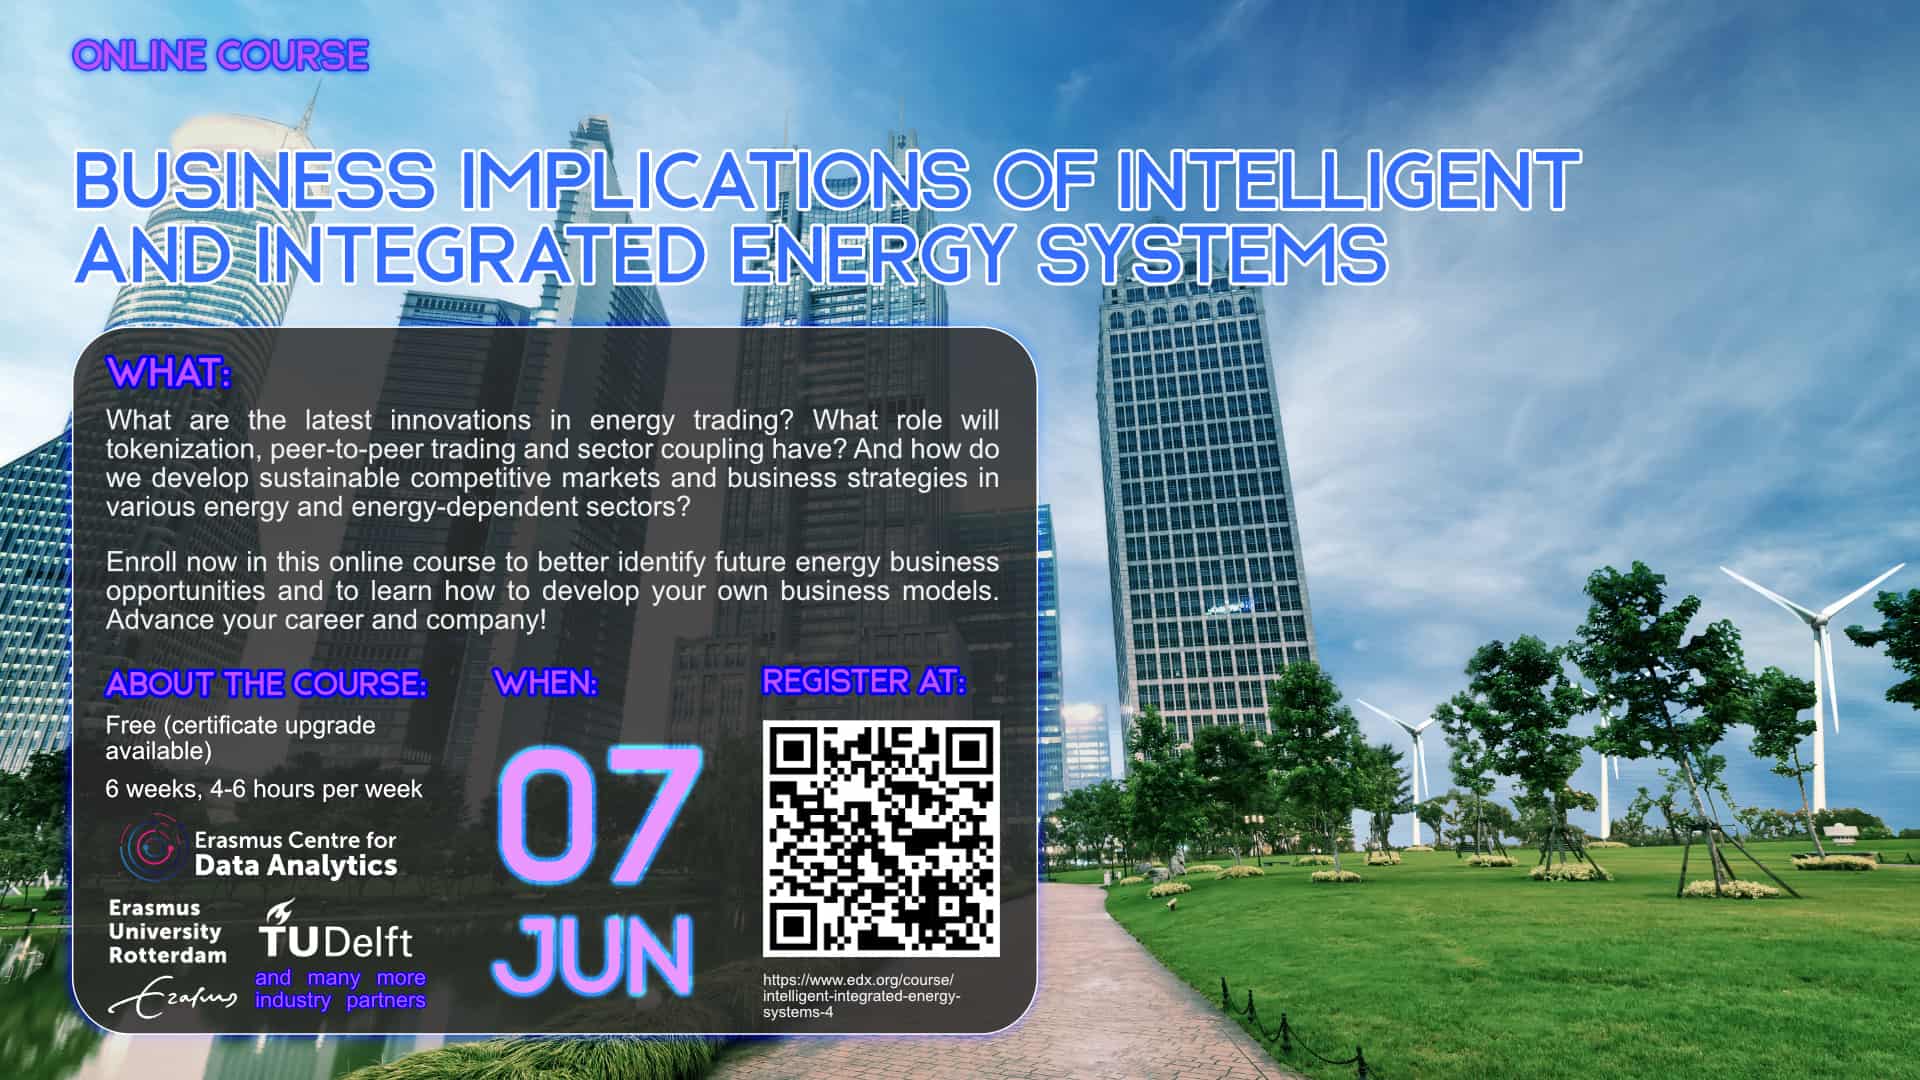 Online course: Business Implications of Intelligent and Integrated Energy Systems